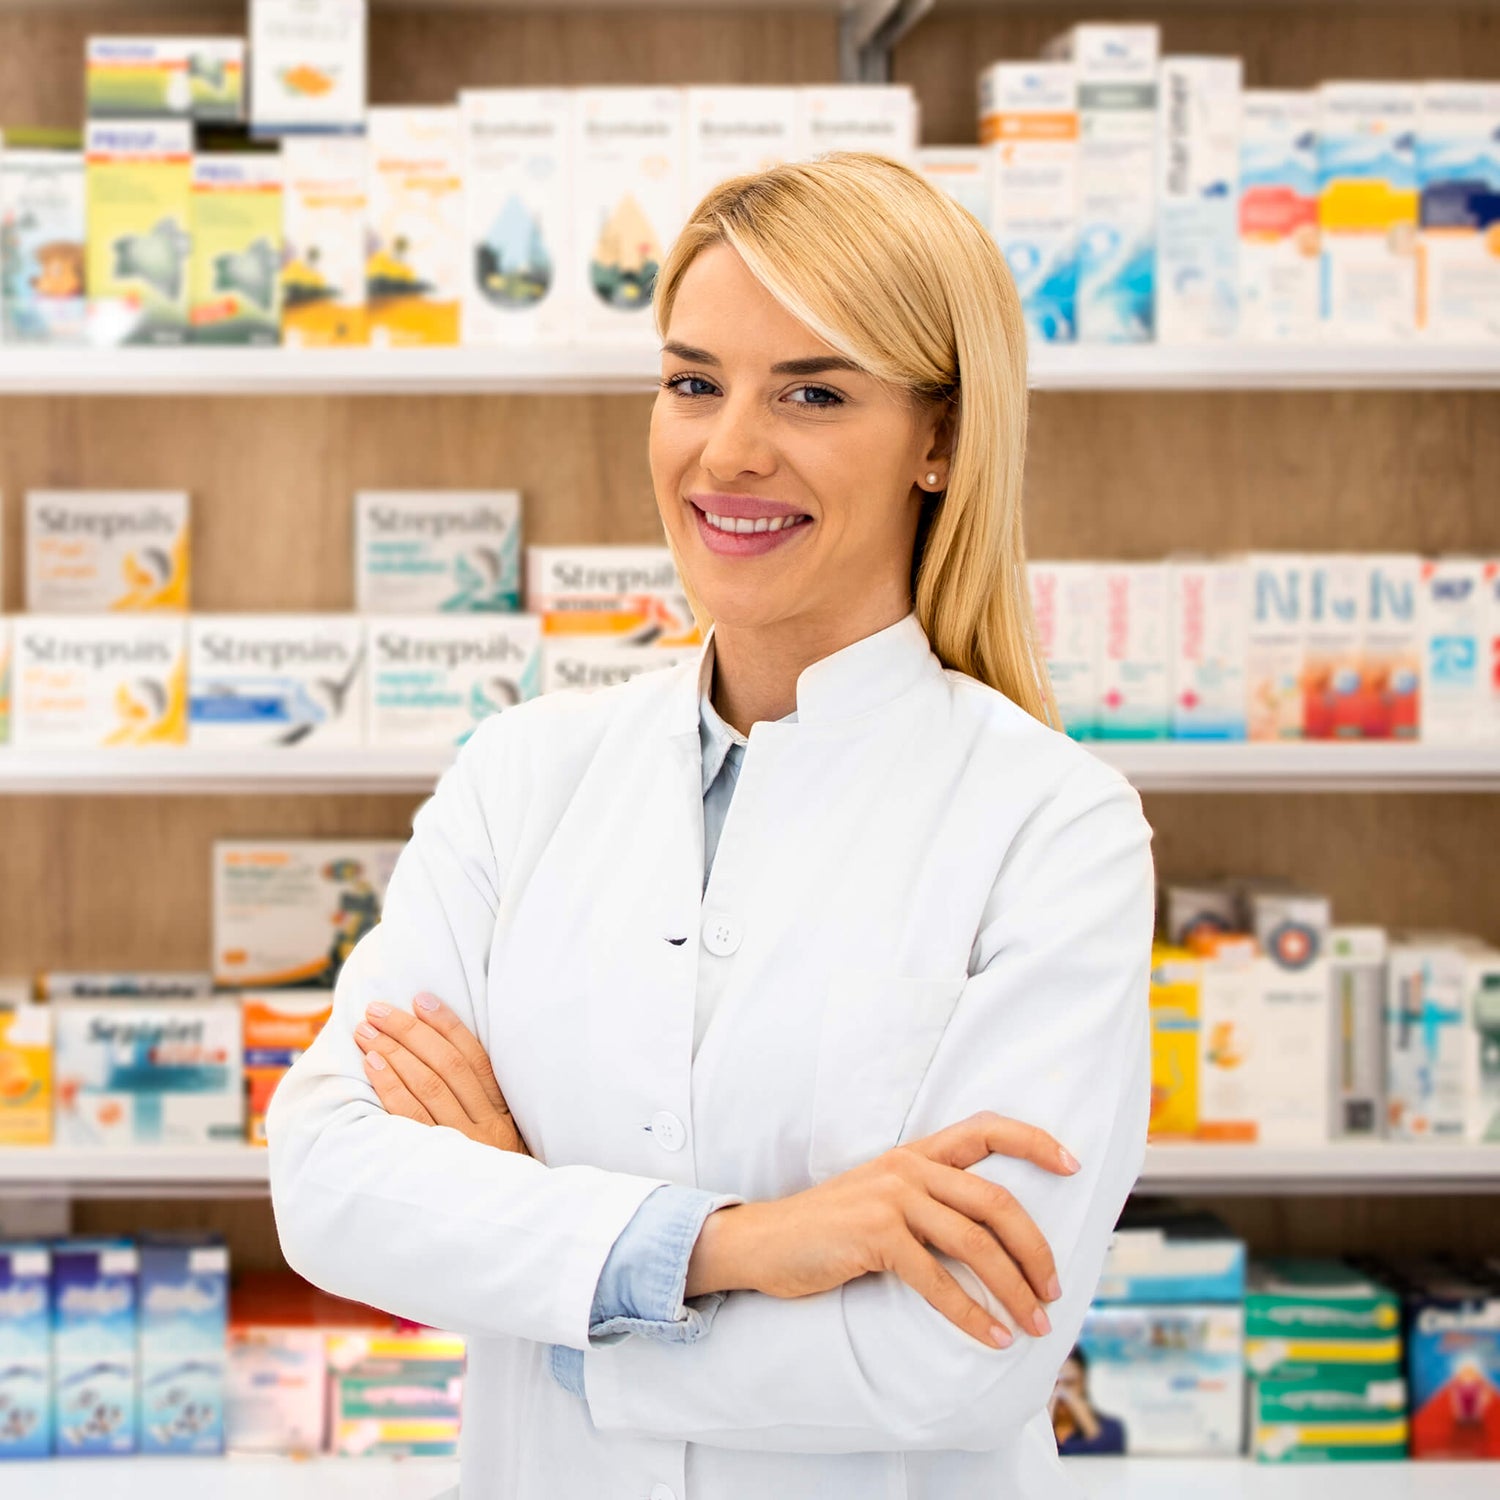 Female pharmacist standing in front of shelves of products